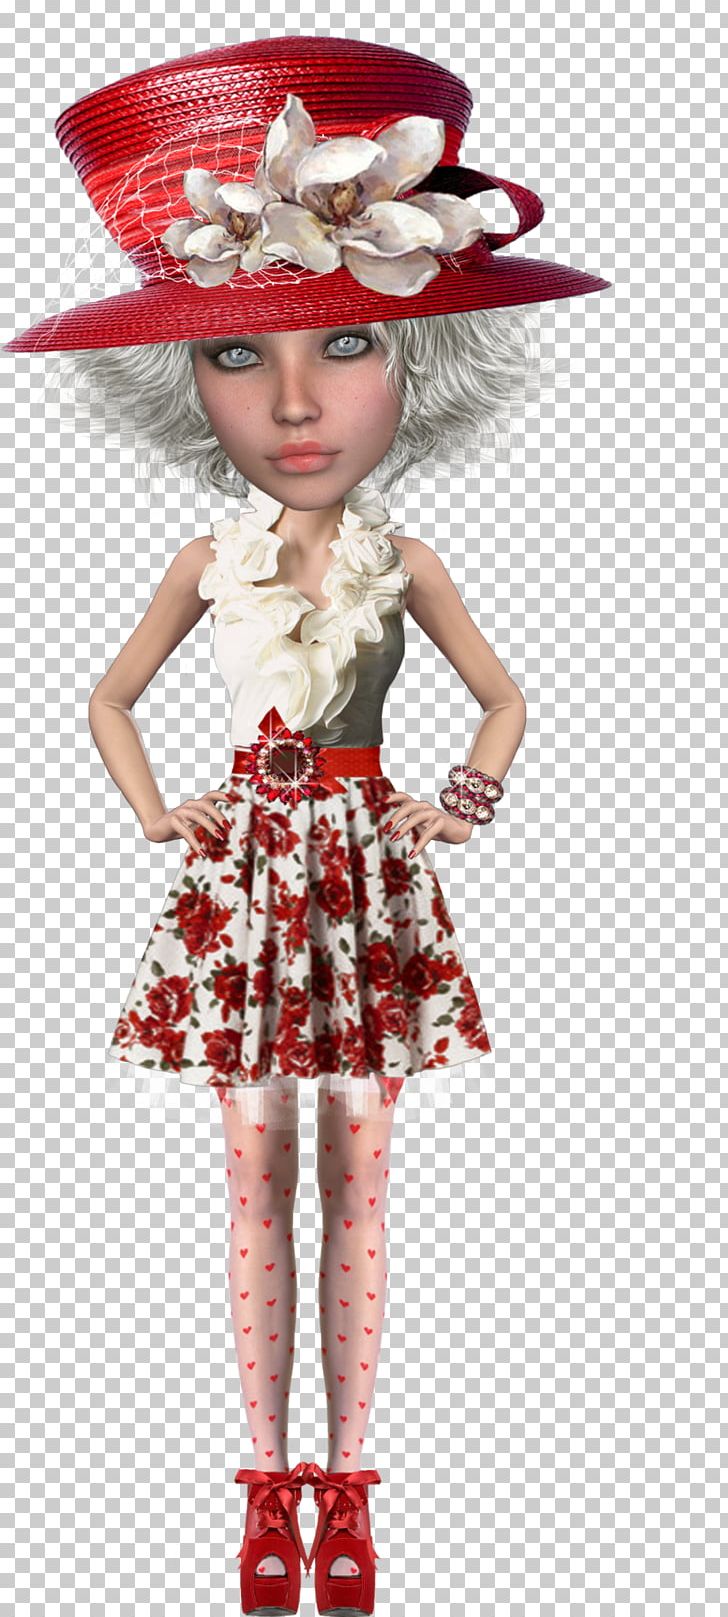 Taylor Swift The Coca-Cola Company Doll Fashion PNG, Clipart, Cocacola, Cocacola Company, Costume, Costume Design, Doll Free PNG Download